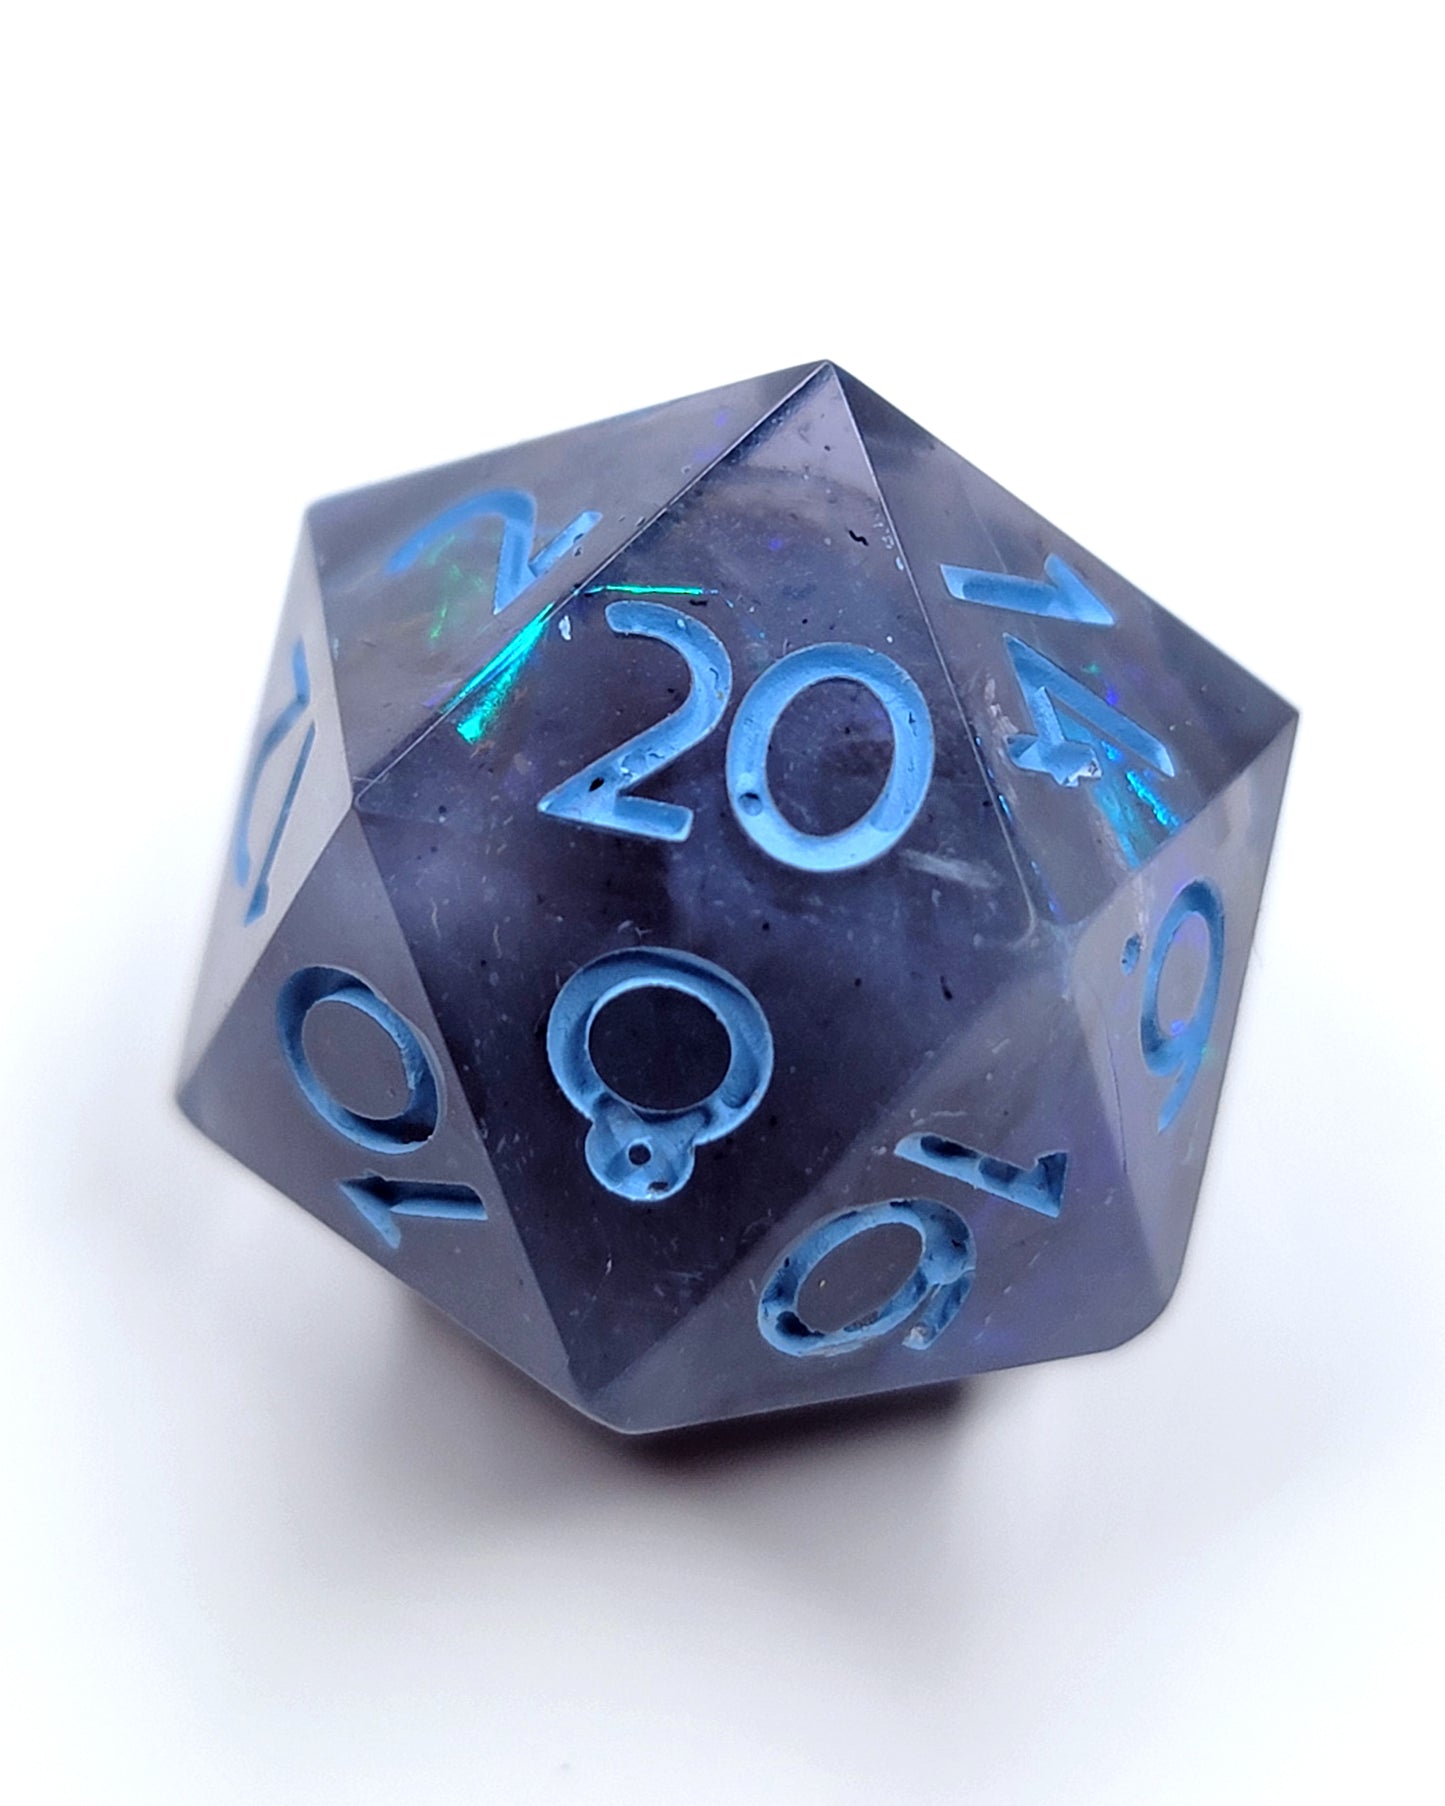 Sorrengail -1 D20 | Handmade Dice | Hand Crafted Dungeons and Dragons Dice